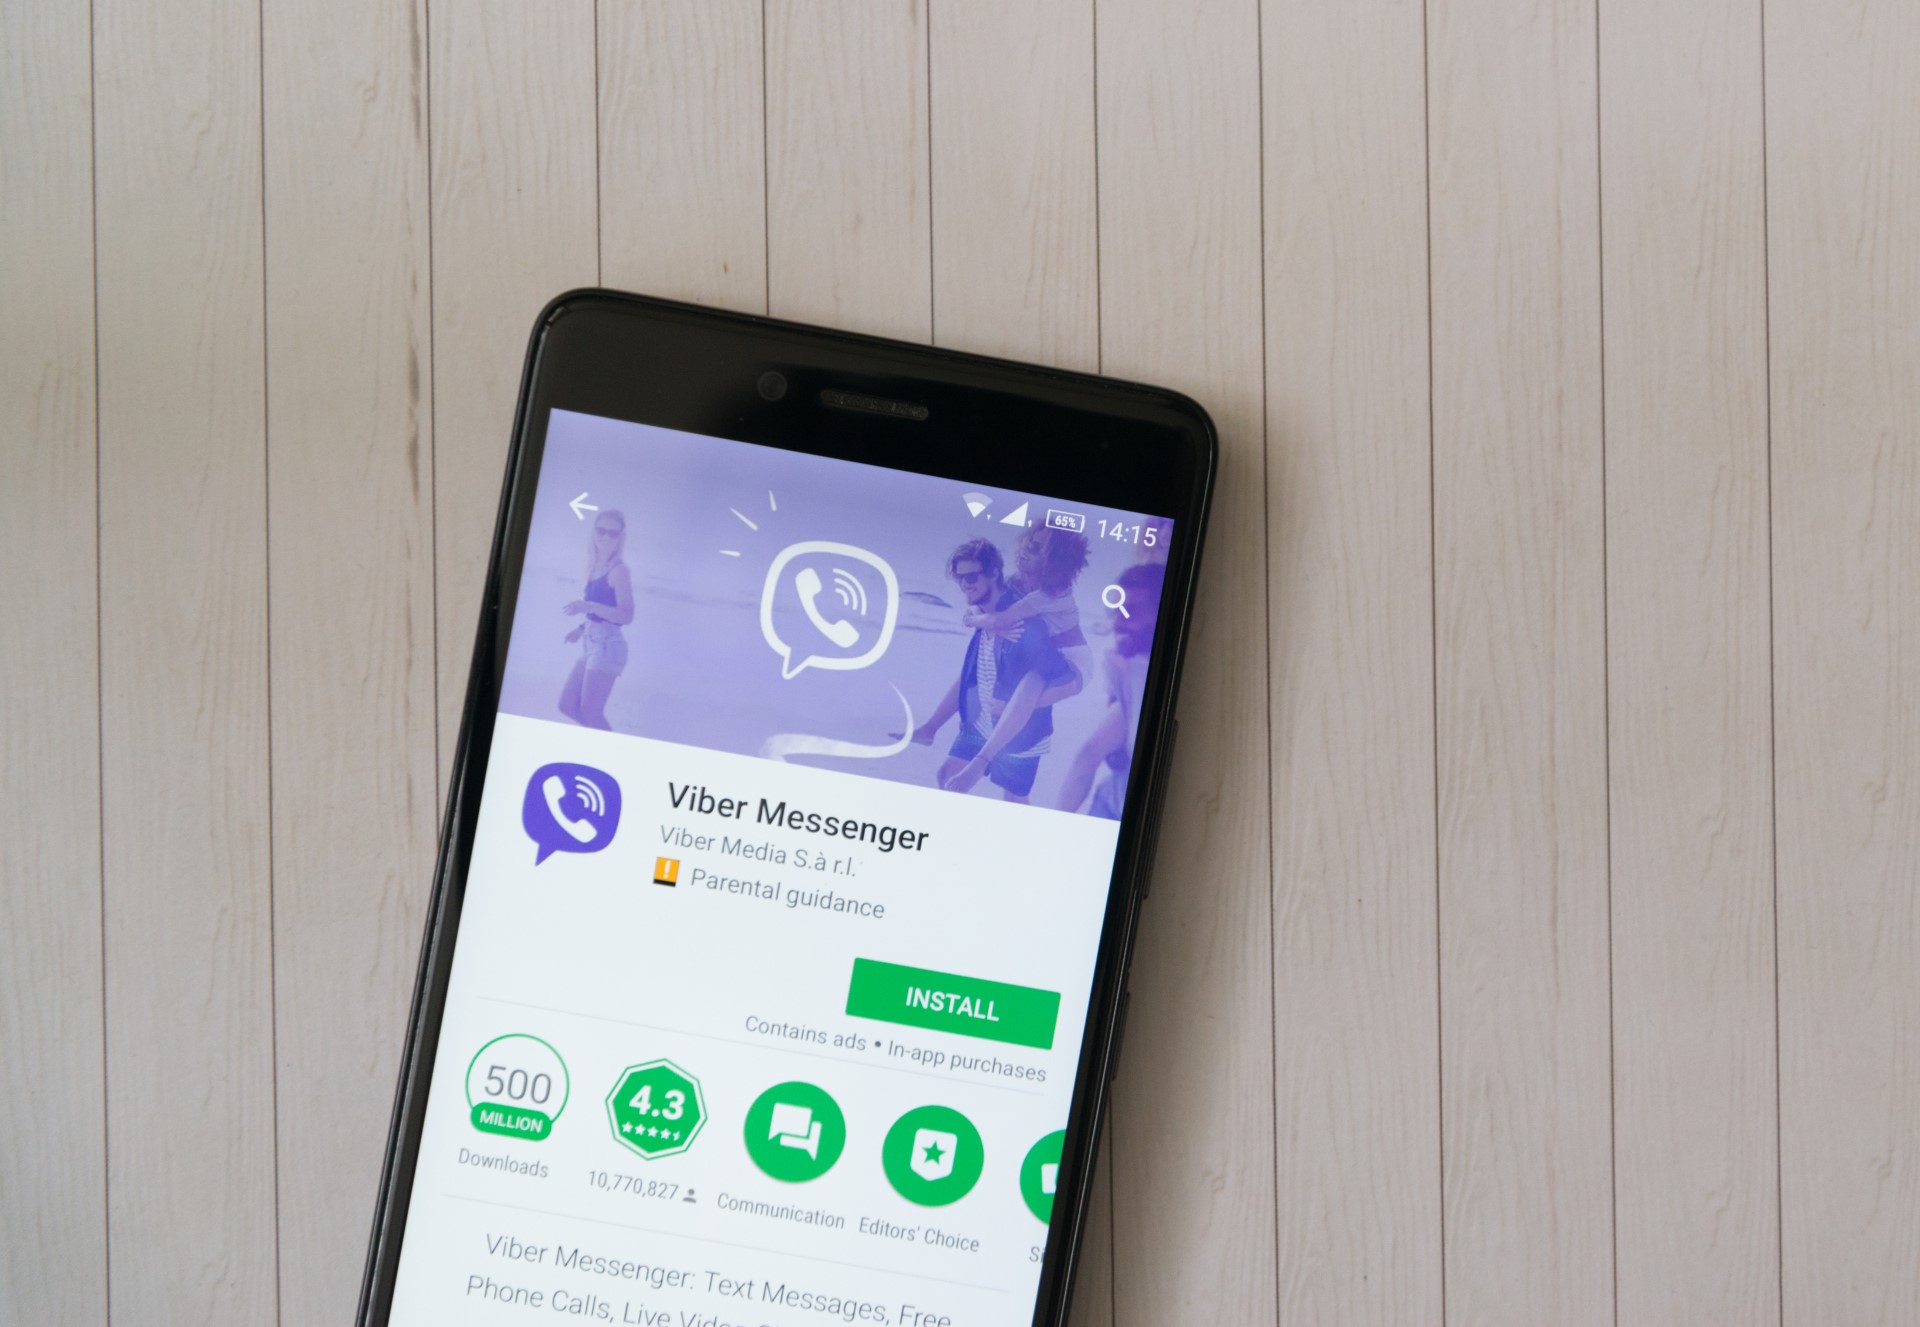 viber for android 2.3.6 apk